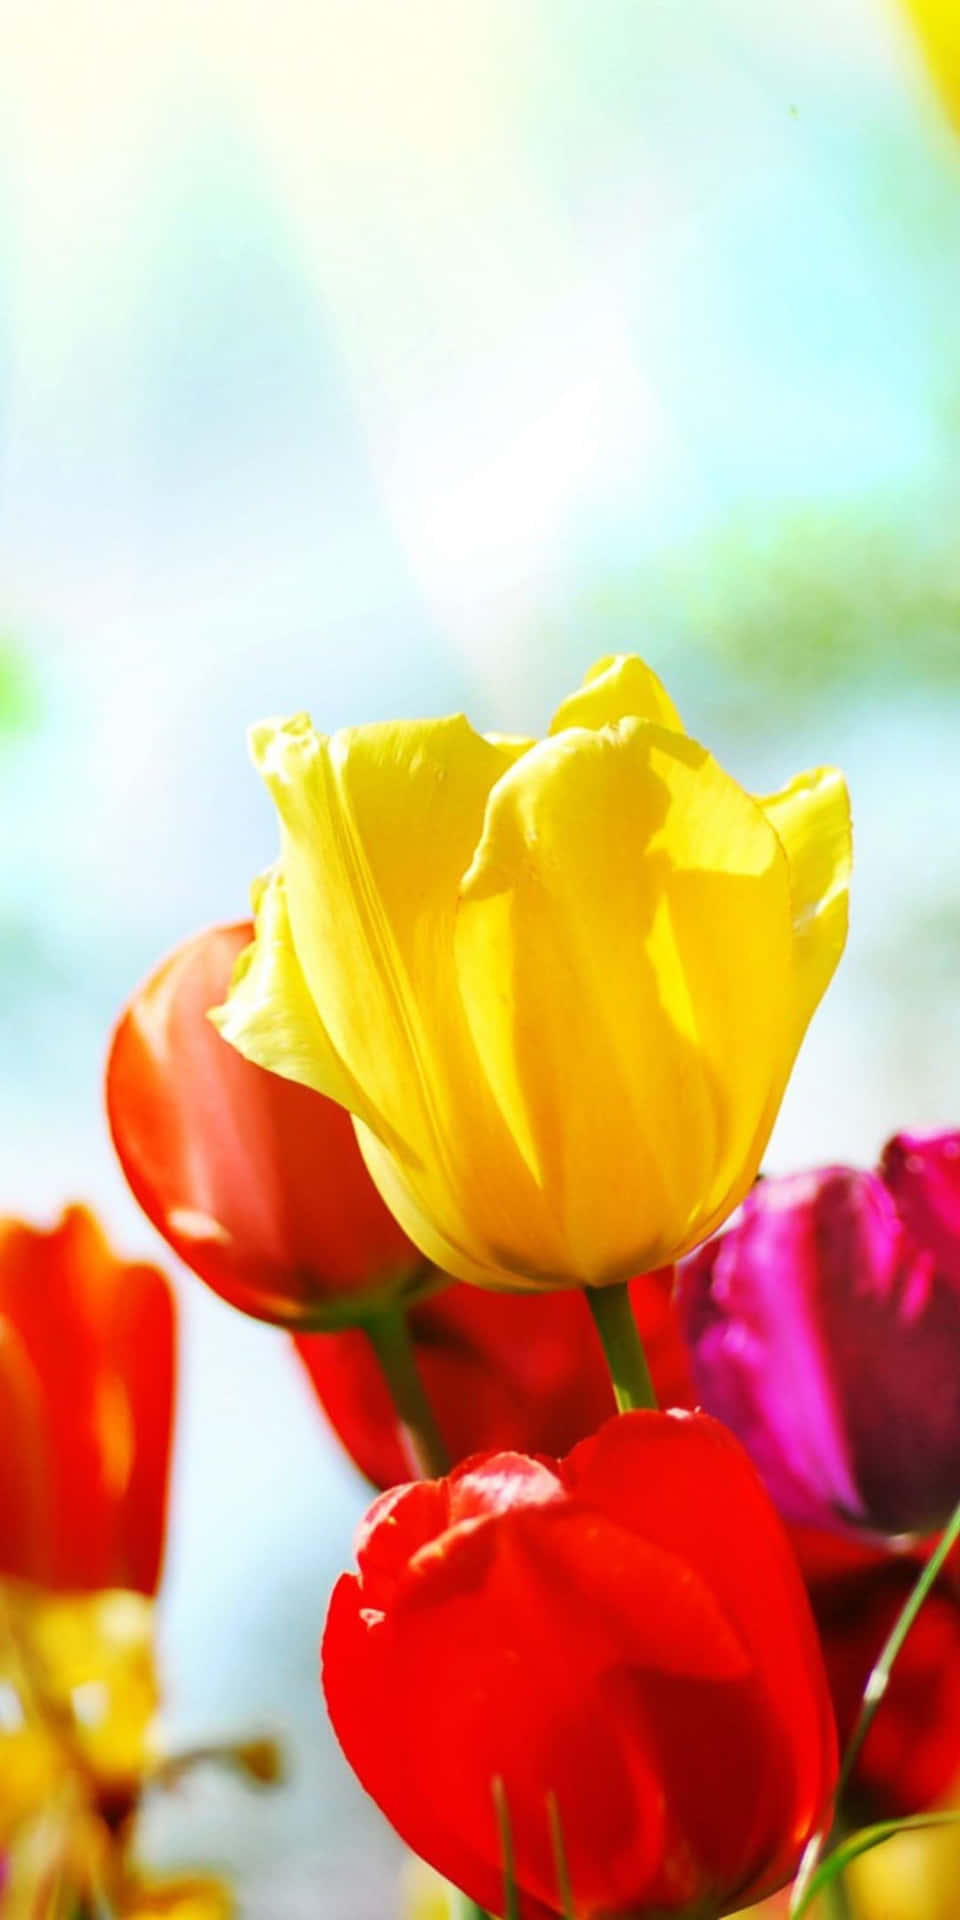 Pixel 3 Yellow And Red Tulip Flowers Background